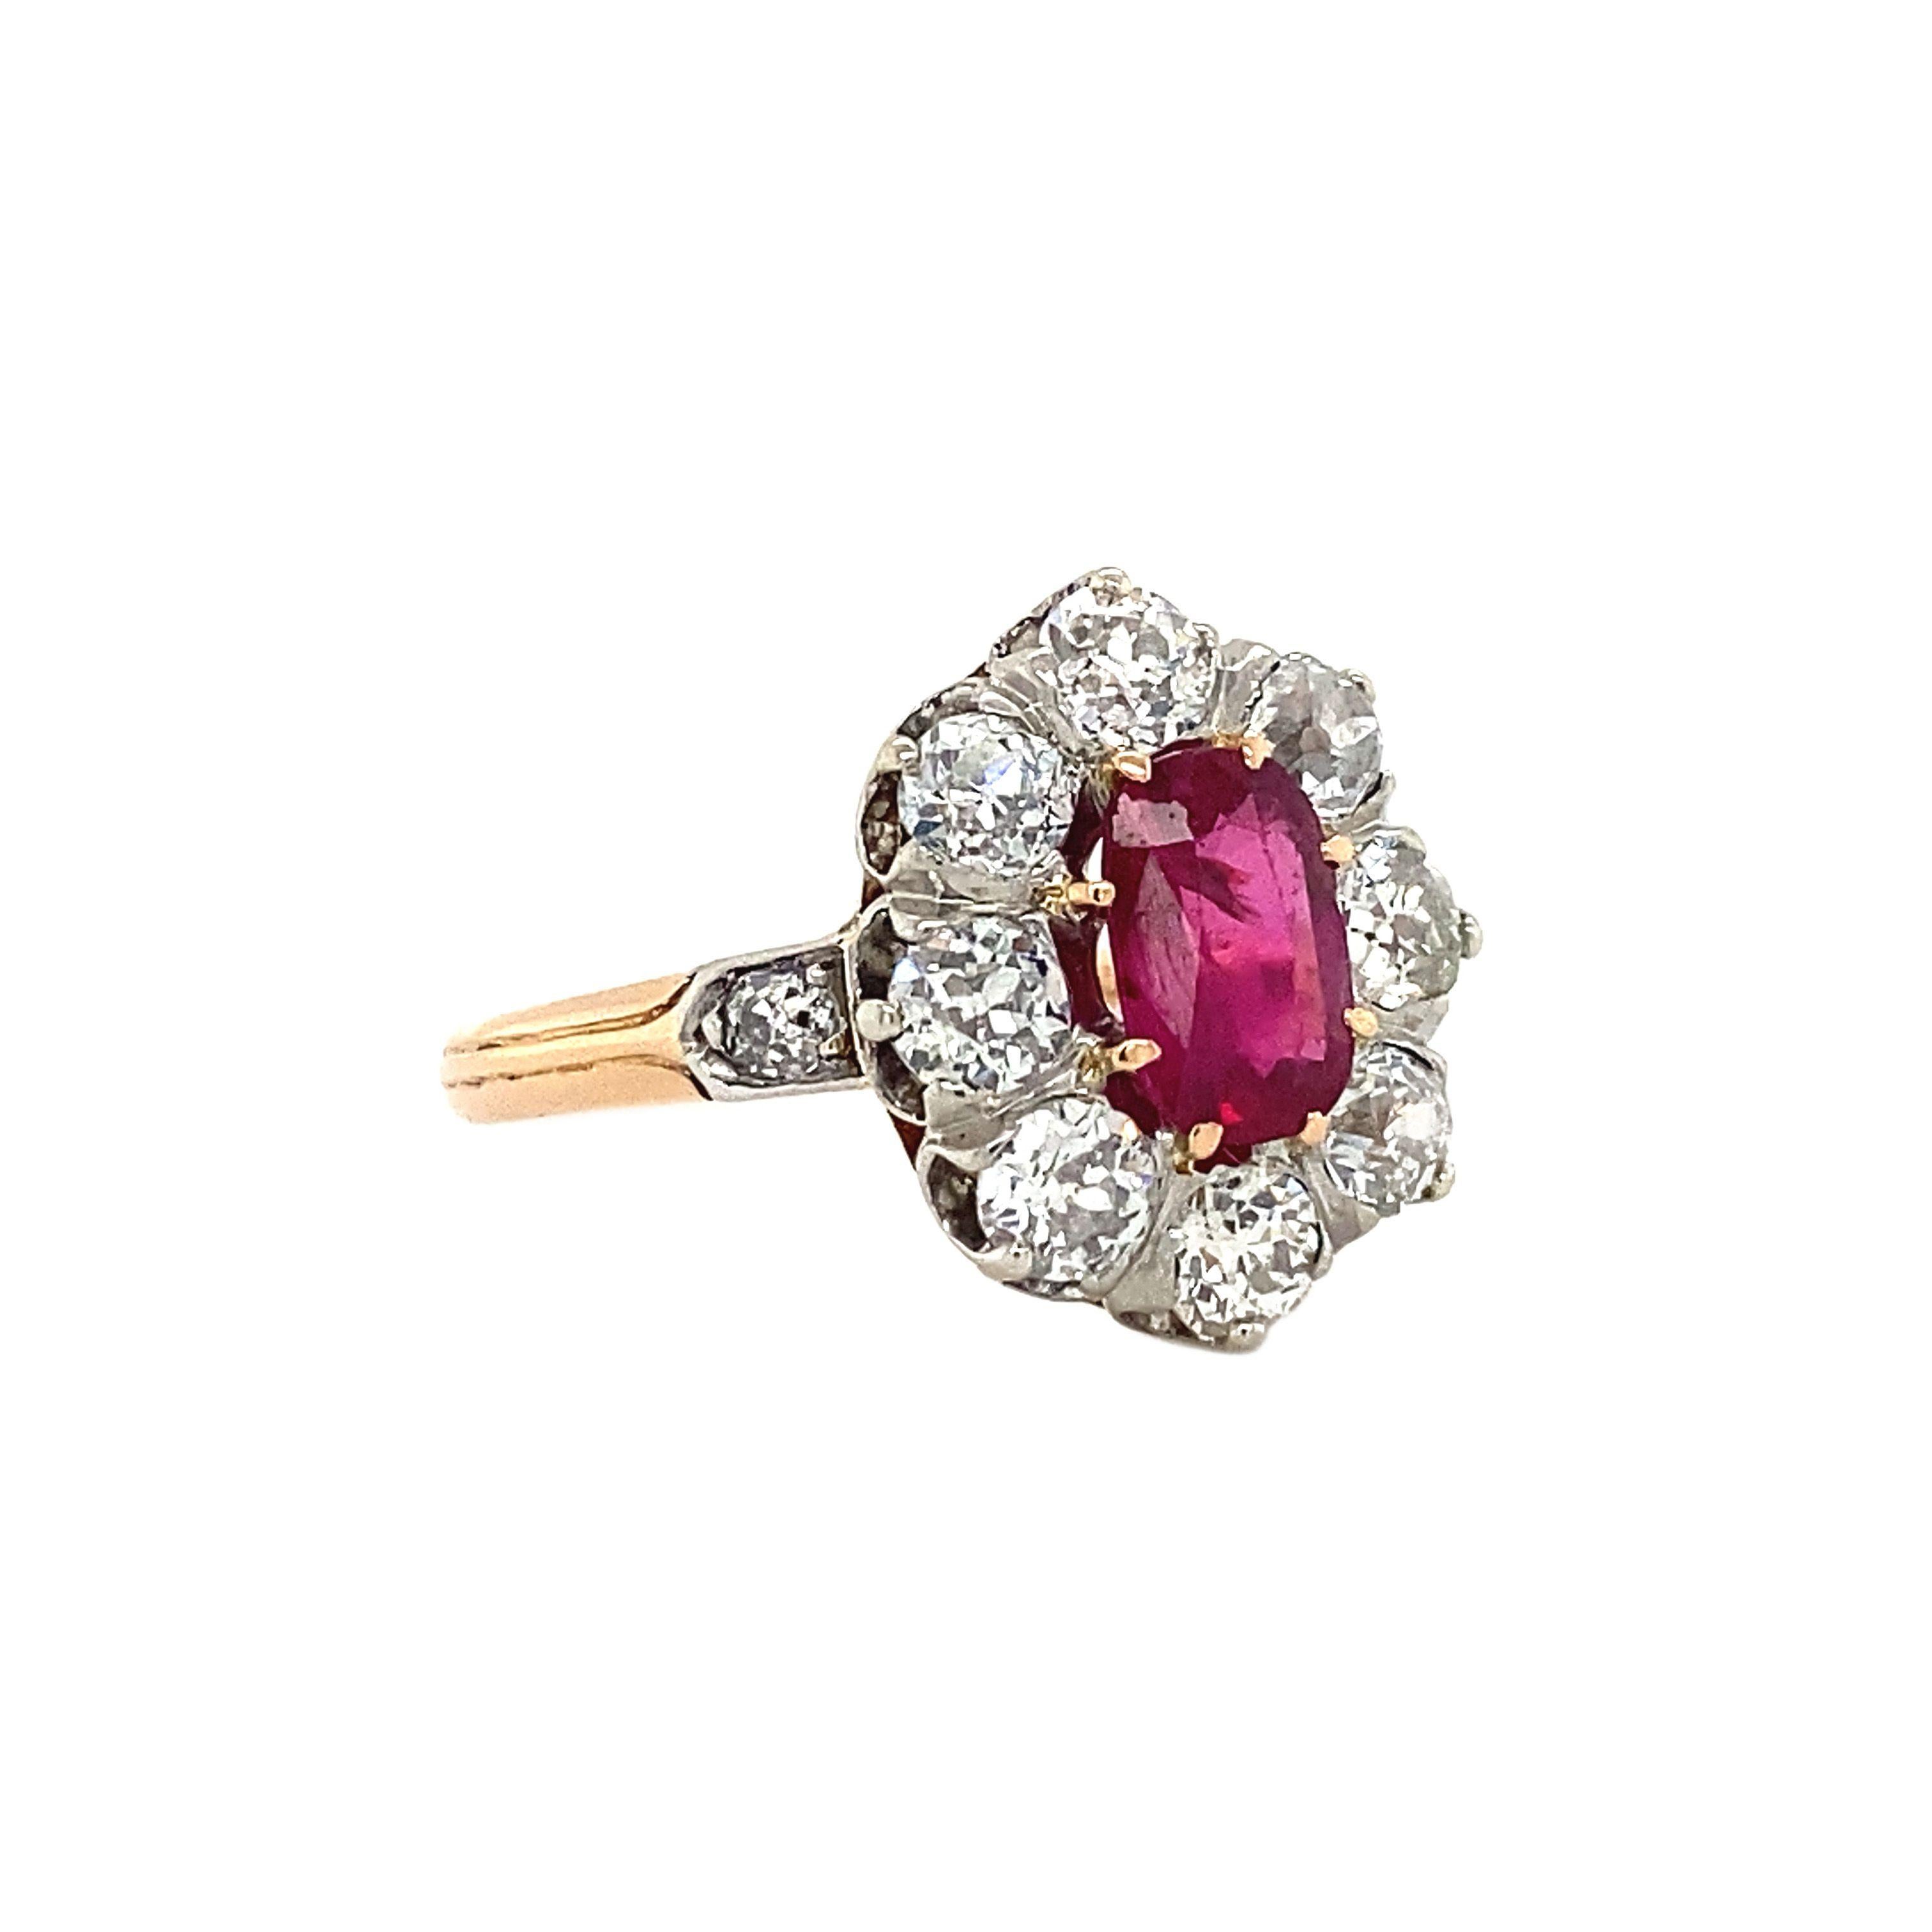 This gold entourage ring has eight diamonds and a faceted ruby in a chaton setting. The diamonds are set in platinum. Not the right size? Our goldsmith can adjust it in our own workshop. 

Material: Yellow gold and platinum
Assay: 14 carat and